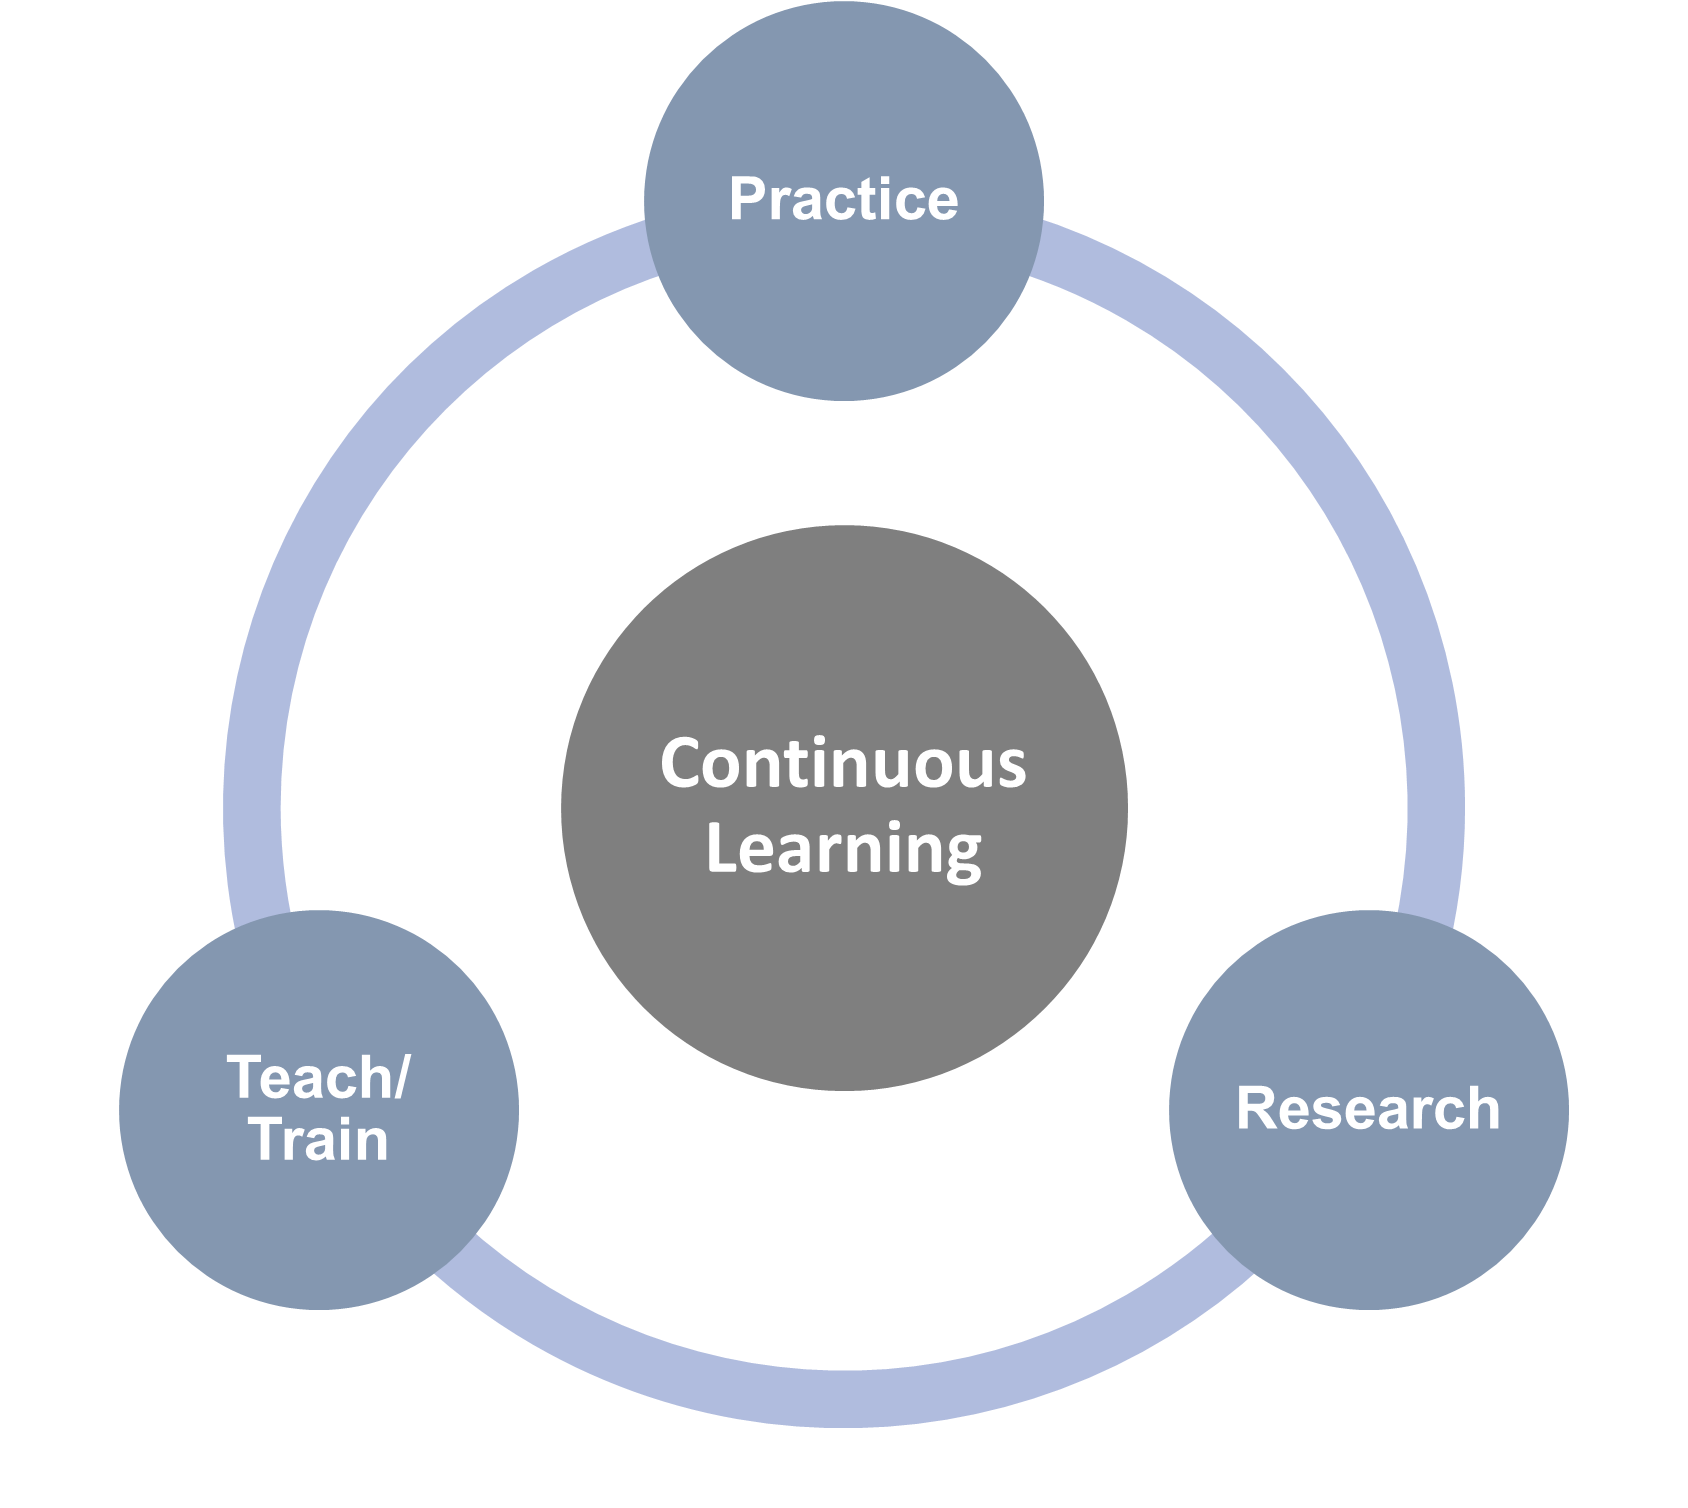 Continuous learning